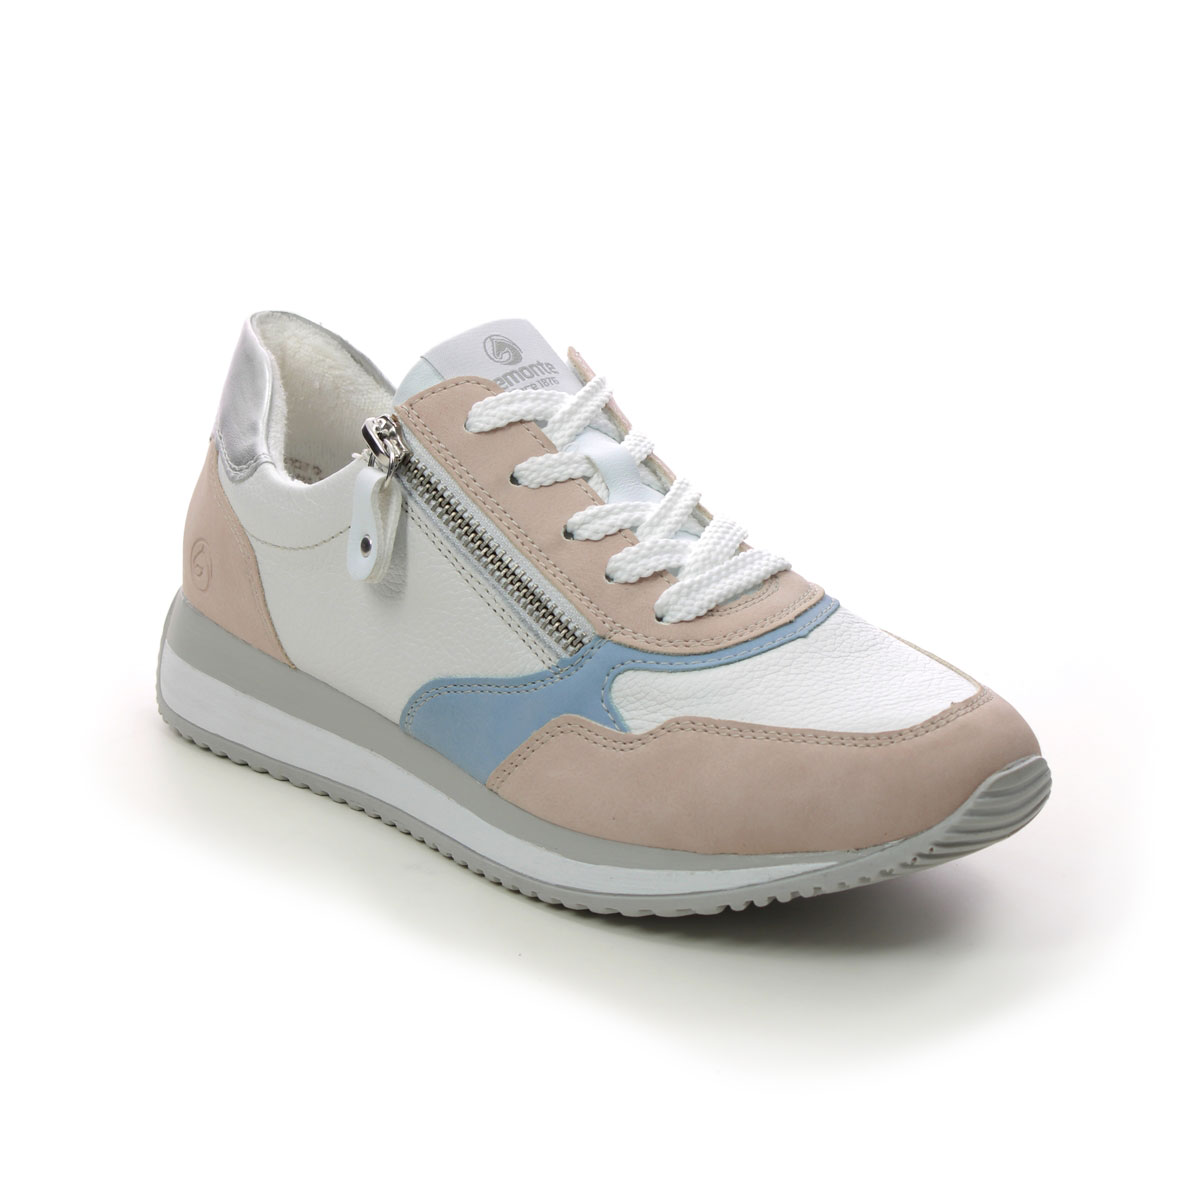 Remonte D0H01-80 Vapod Zip White Blue Pink Womens trainers in a Plain Leather and Man-made in Size 42